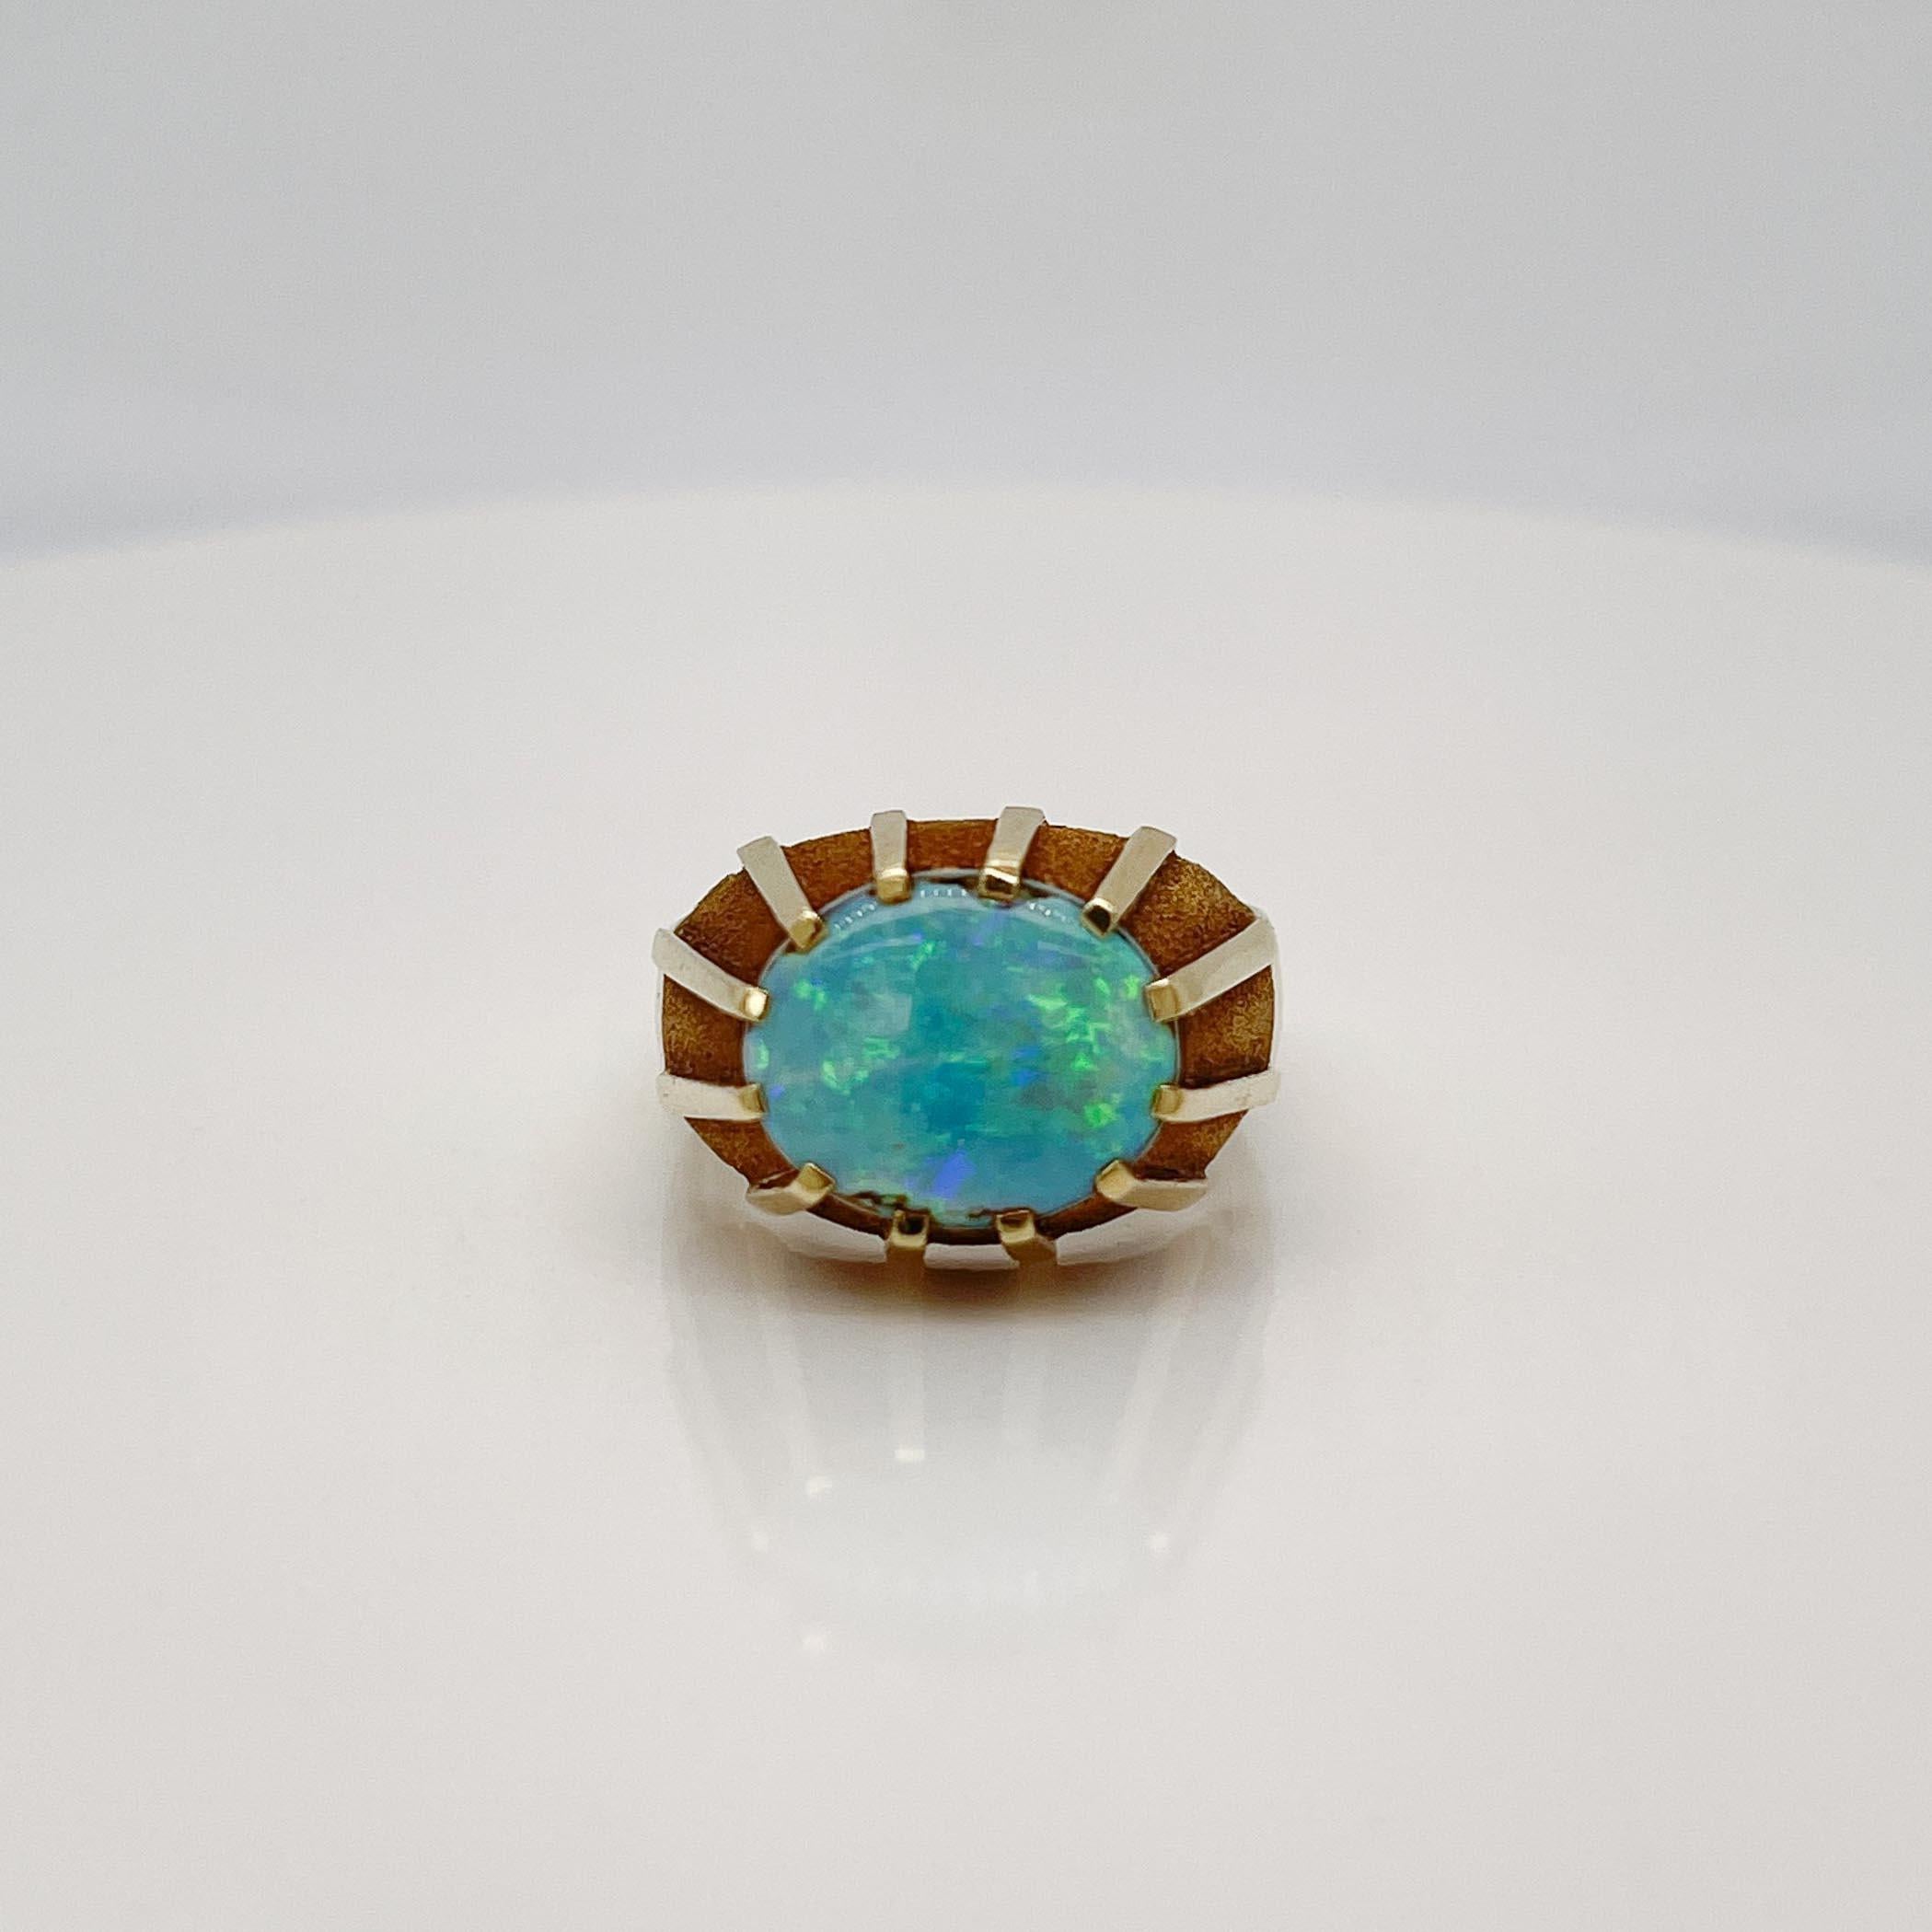 A fine German Mid-Century gold and opal ring.

In 14k yellow gold. 

Prong set with a smooth oval opal doublet. 

Each smooth prong extends into the design of the ring and alternates with gold textured surfaces. The opal doublet has a beautiful